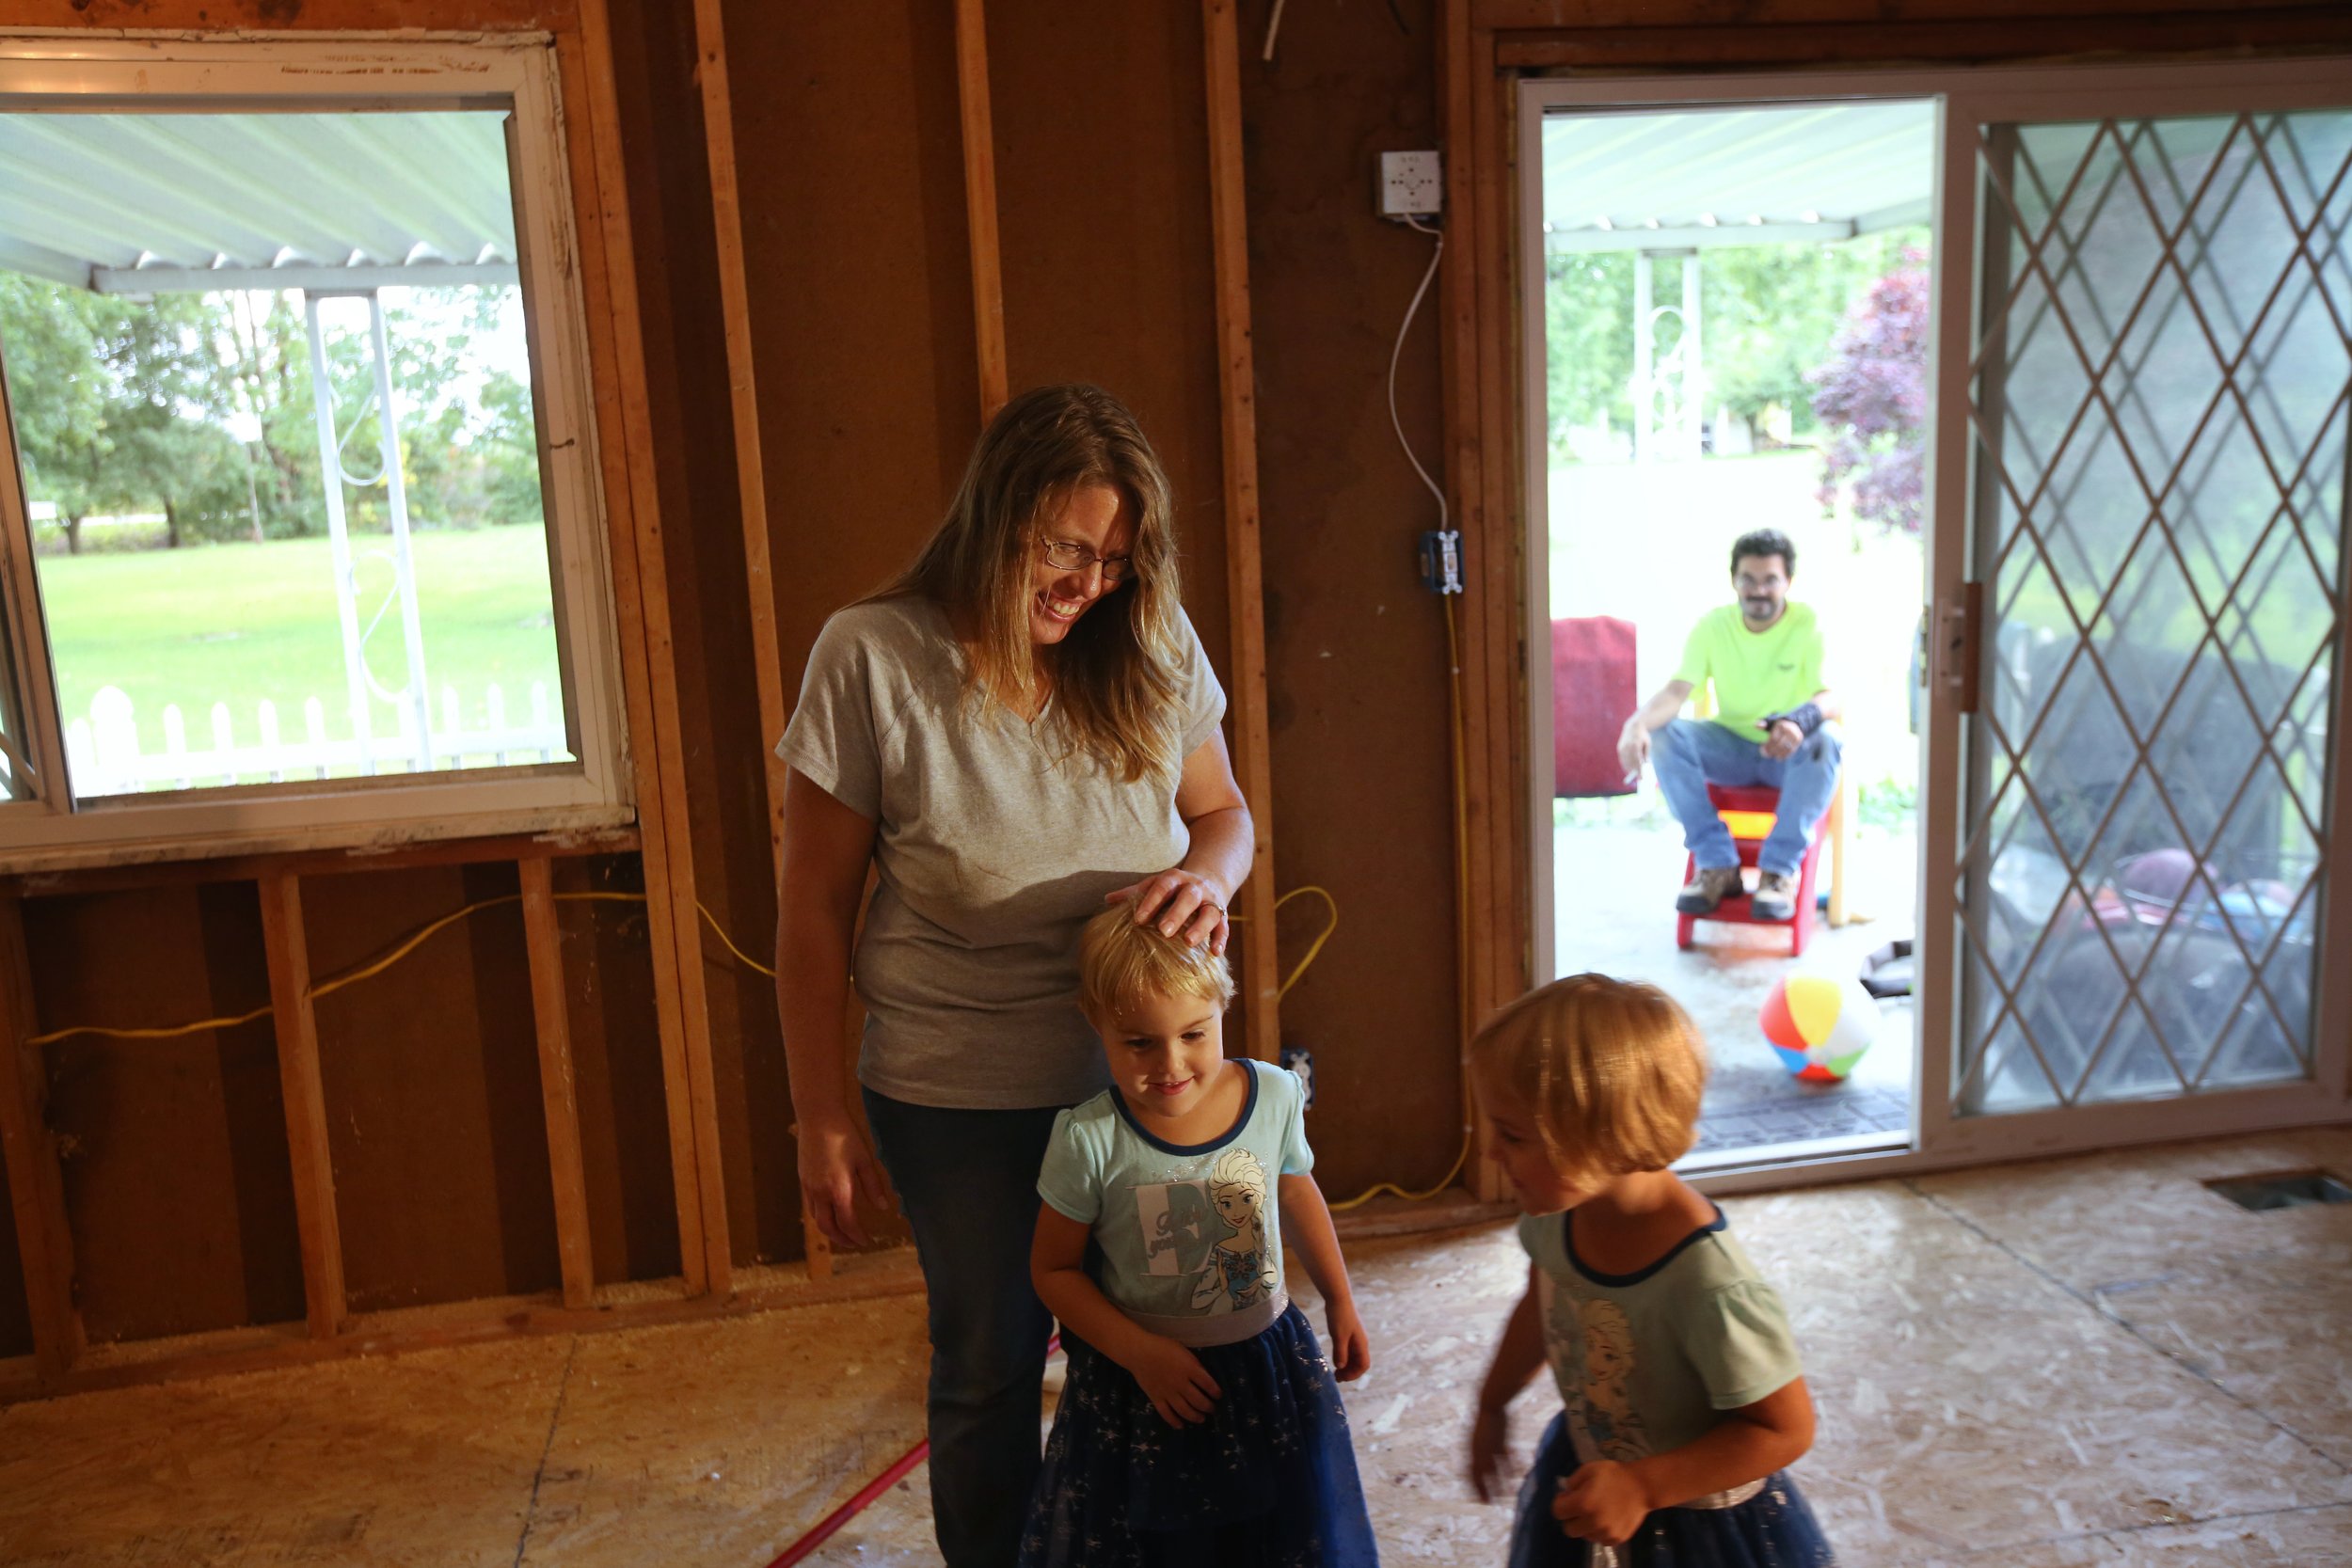  Josianne Thomas laughs as she and her husband Mike, right, take a break from renovating their new home on Sept. 17, 2016. Josianne and her twin 4-year-old daughters survived the same attack that claimed the lives of her two eldest children, and afte